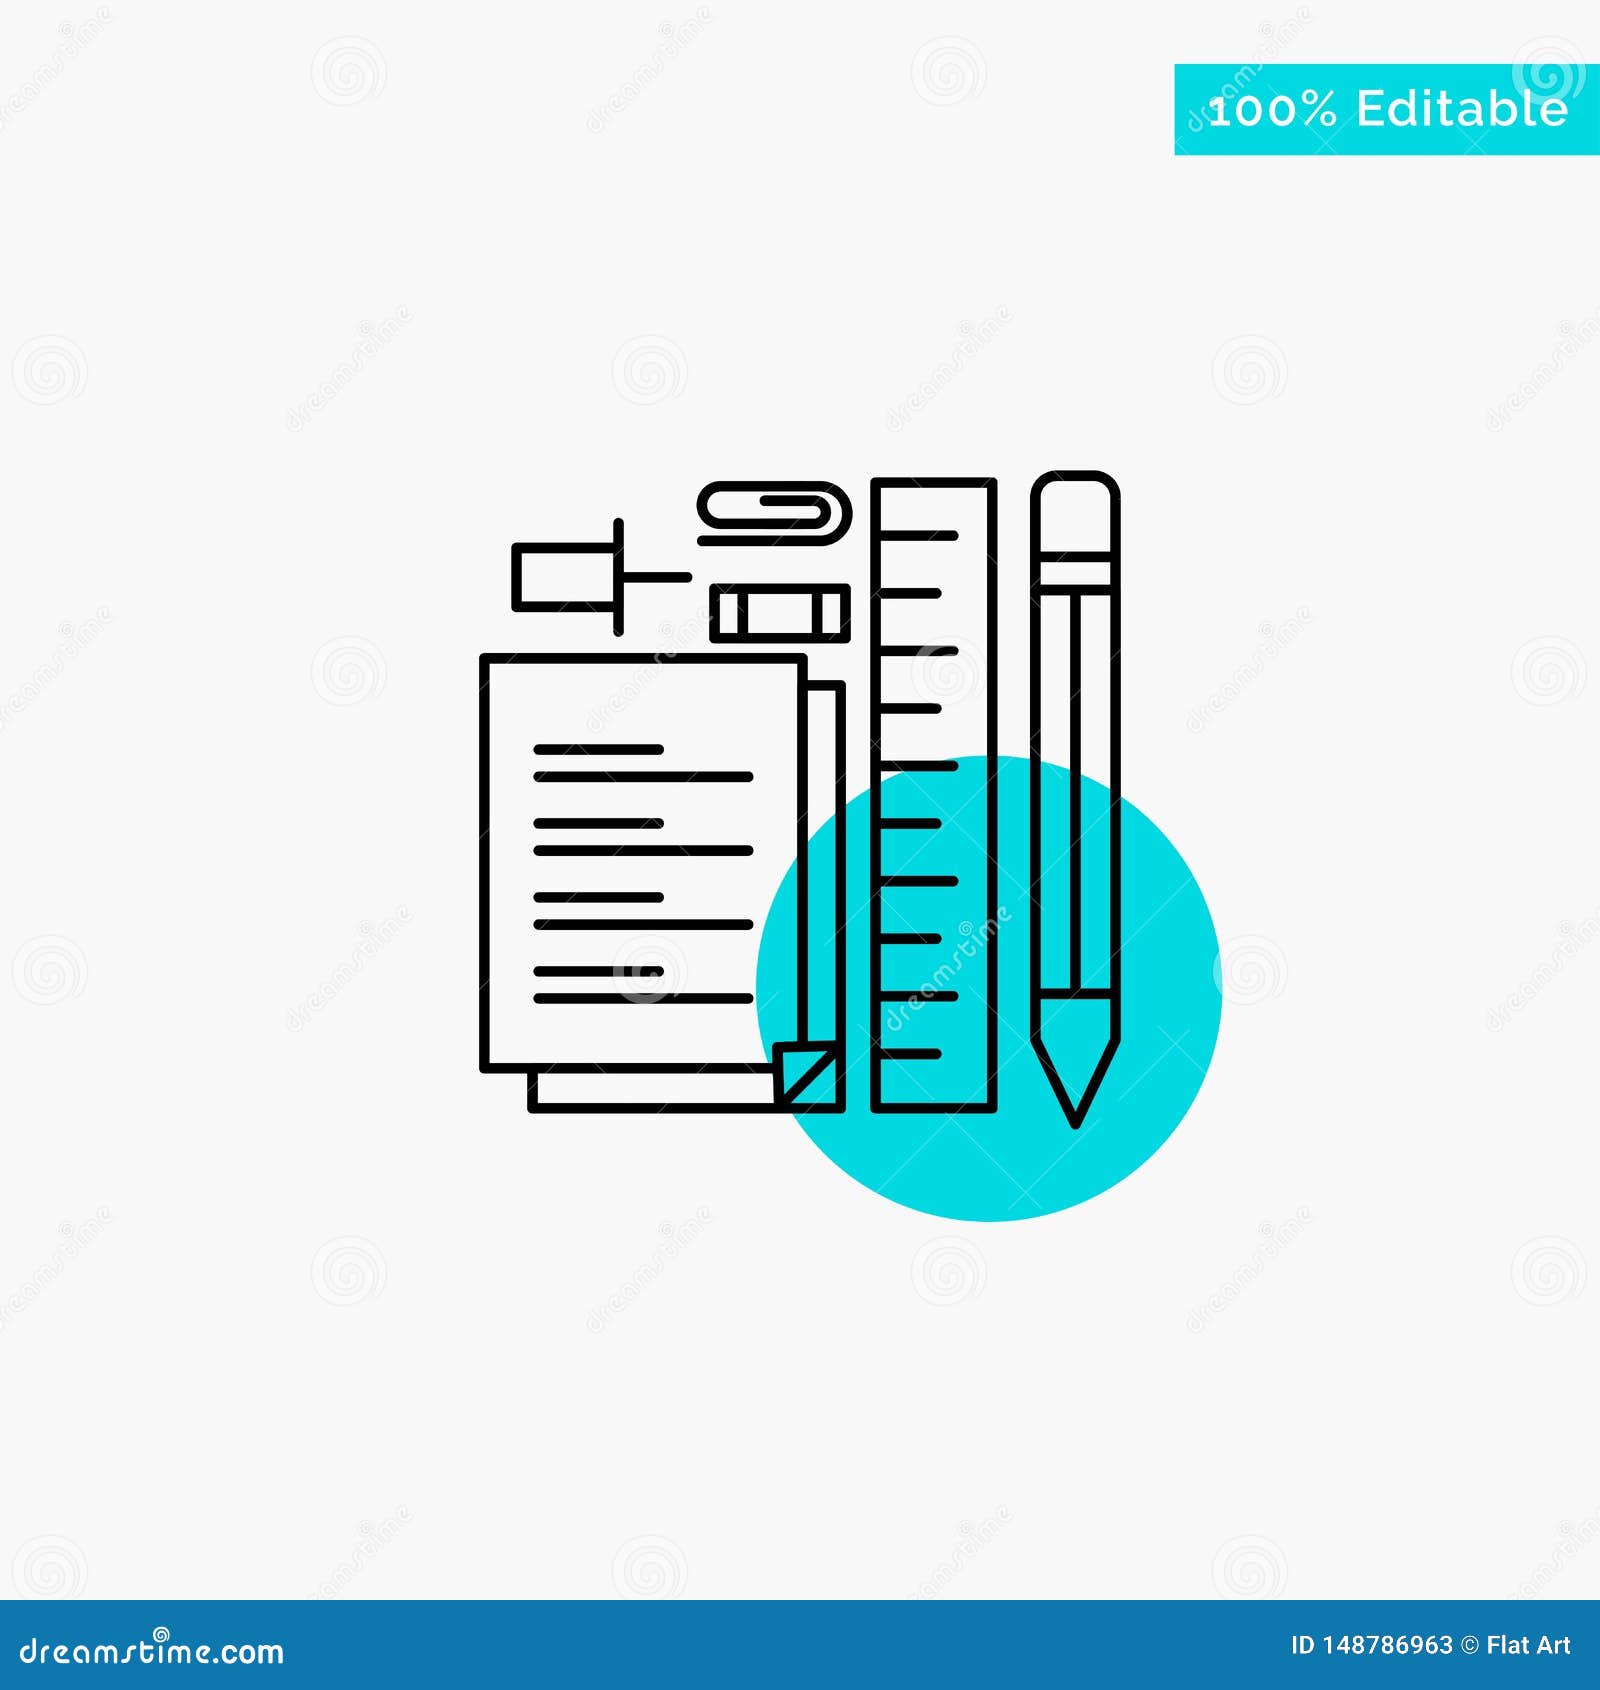 stationary, pencil, pen, notepad, pin turquoise highlight circle point  icon